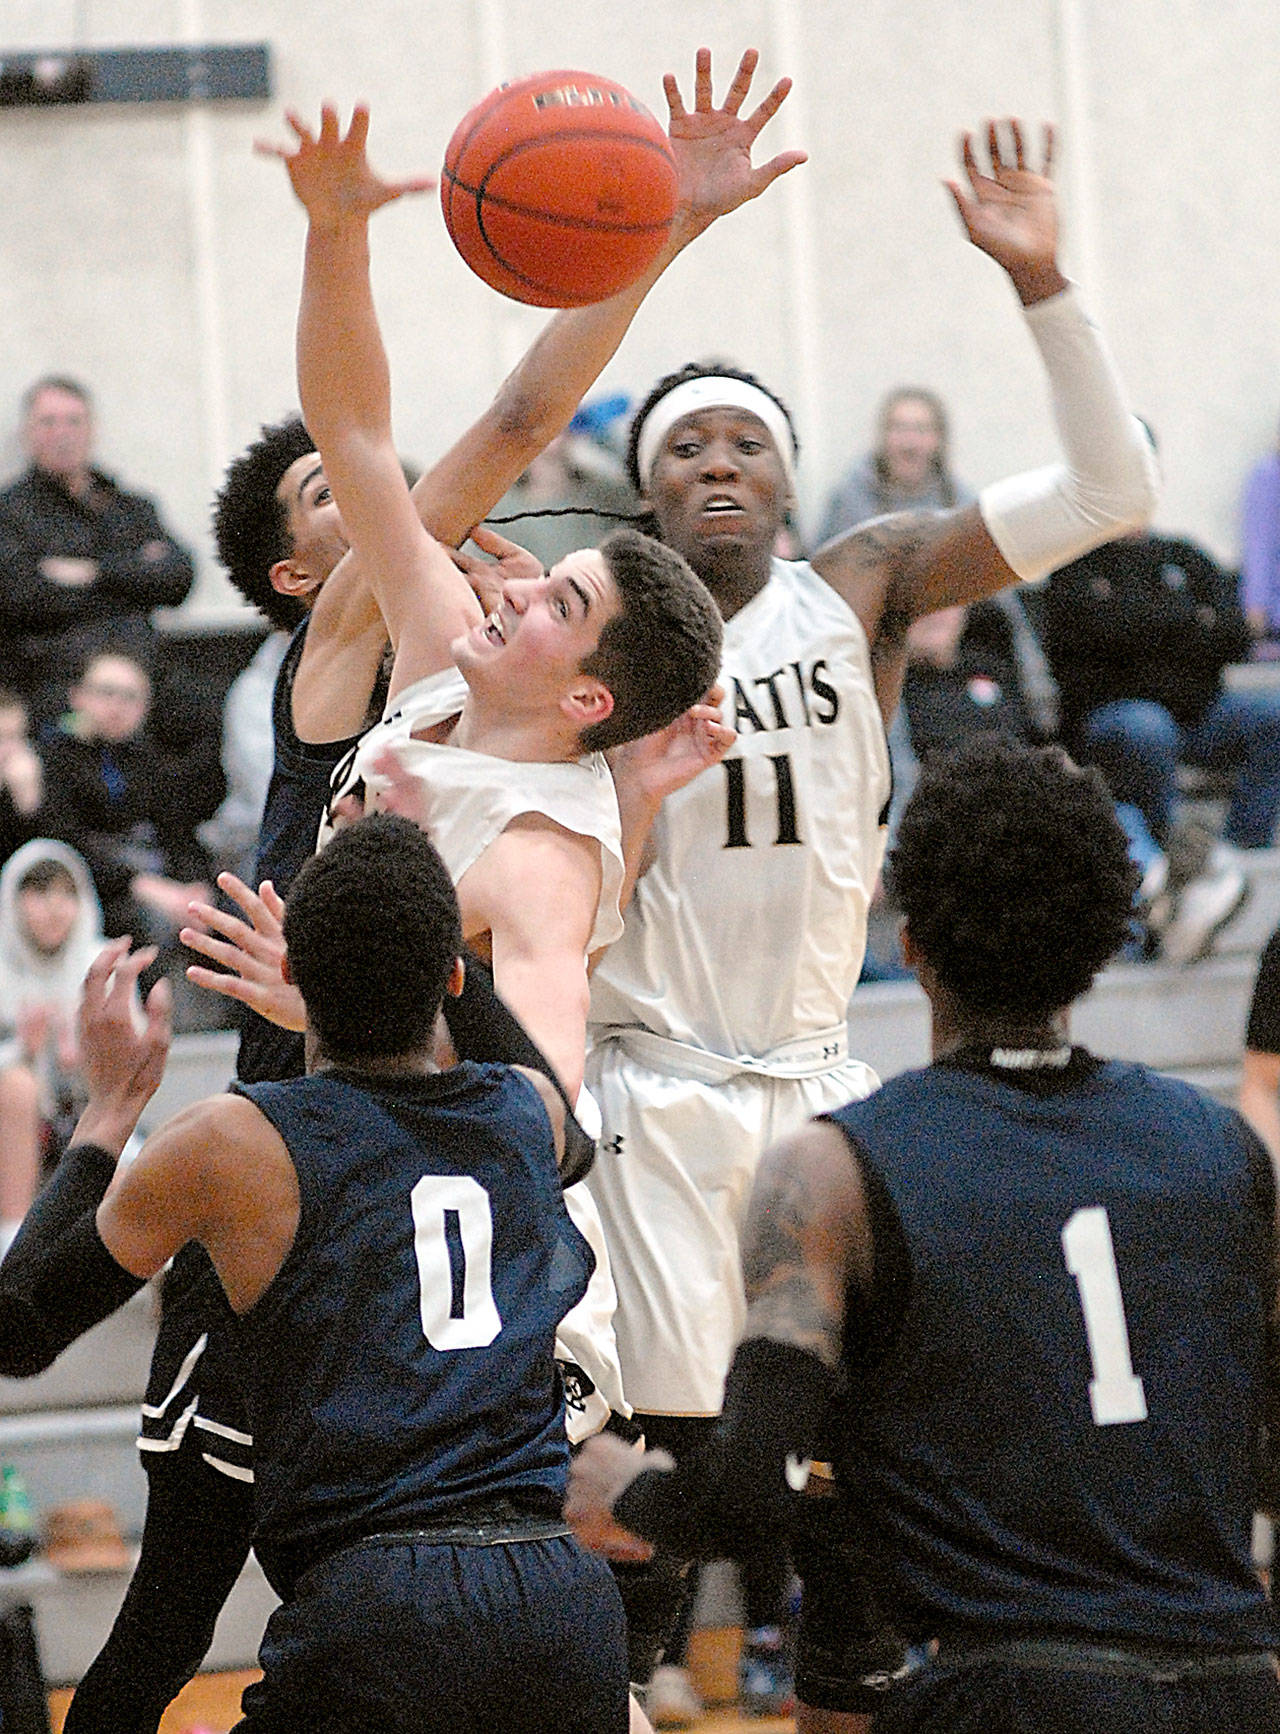 Peninsula College’s Nate Despain, center left, and Malik Moore, center right, fight for a rebound surrounded by Bellevue defenders Trey Lawrence, back, Trevon Richmond, front left, and Tijohn Rodde, front right, in February at Peninsula College in Port Angeles. Despain, a 2019 Sequim High grad, and the Pirates saw their 2020-2021 season pushed back to March 1. File photo by Keith Thorpe/Olympic Peninsula News Group